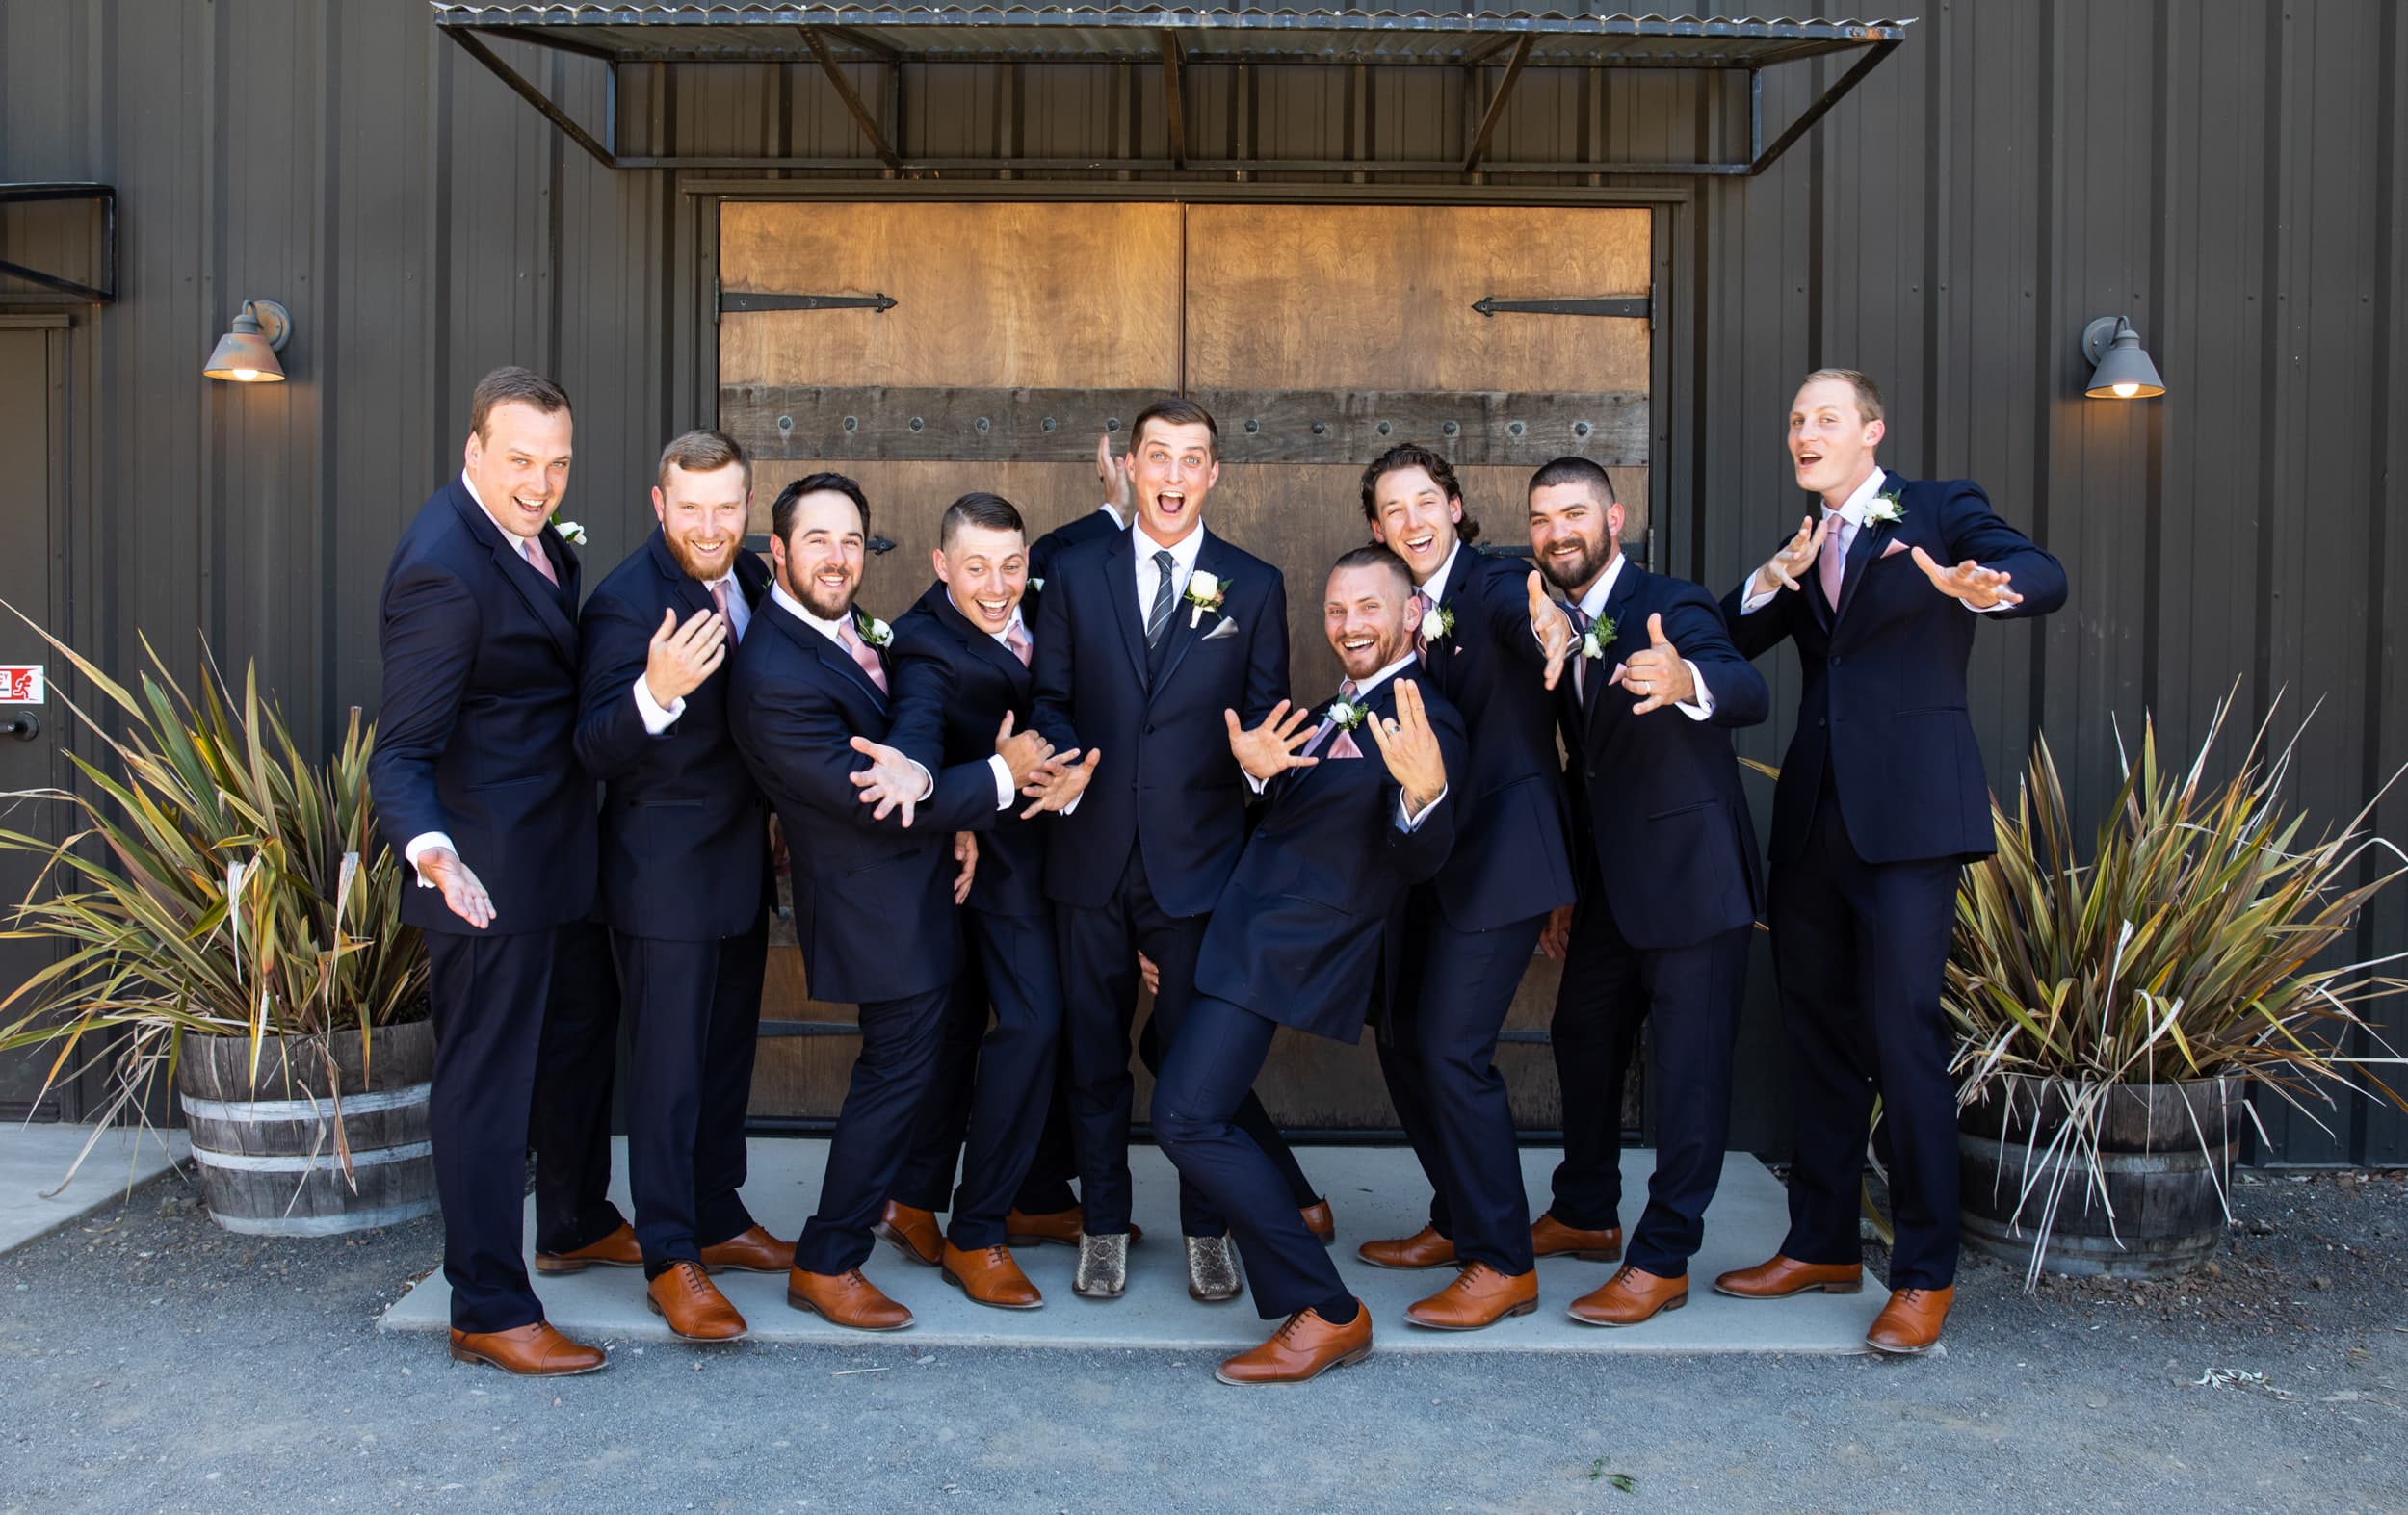 groom and groomsmen posing for a silly photo